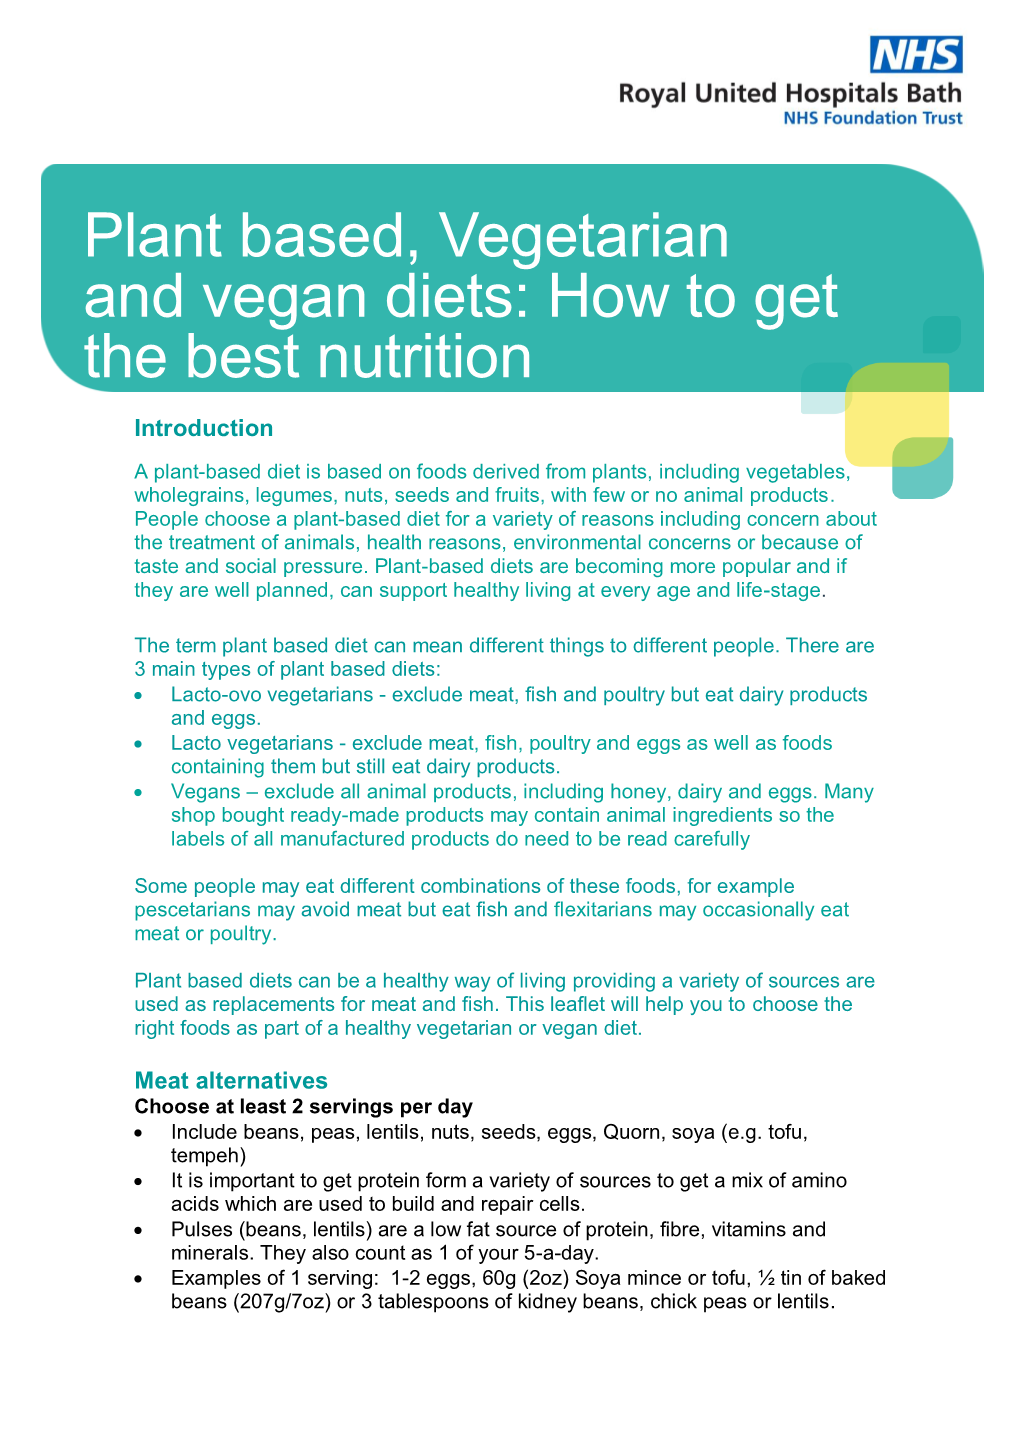 Plant Based, Vegetarian and Vegan Diets: How to Get the Best Nutrition